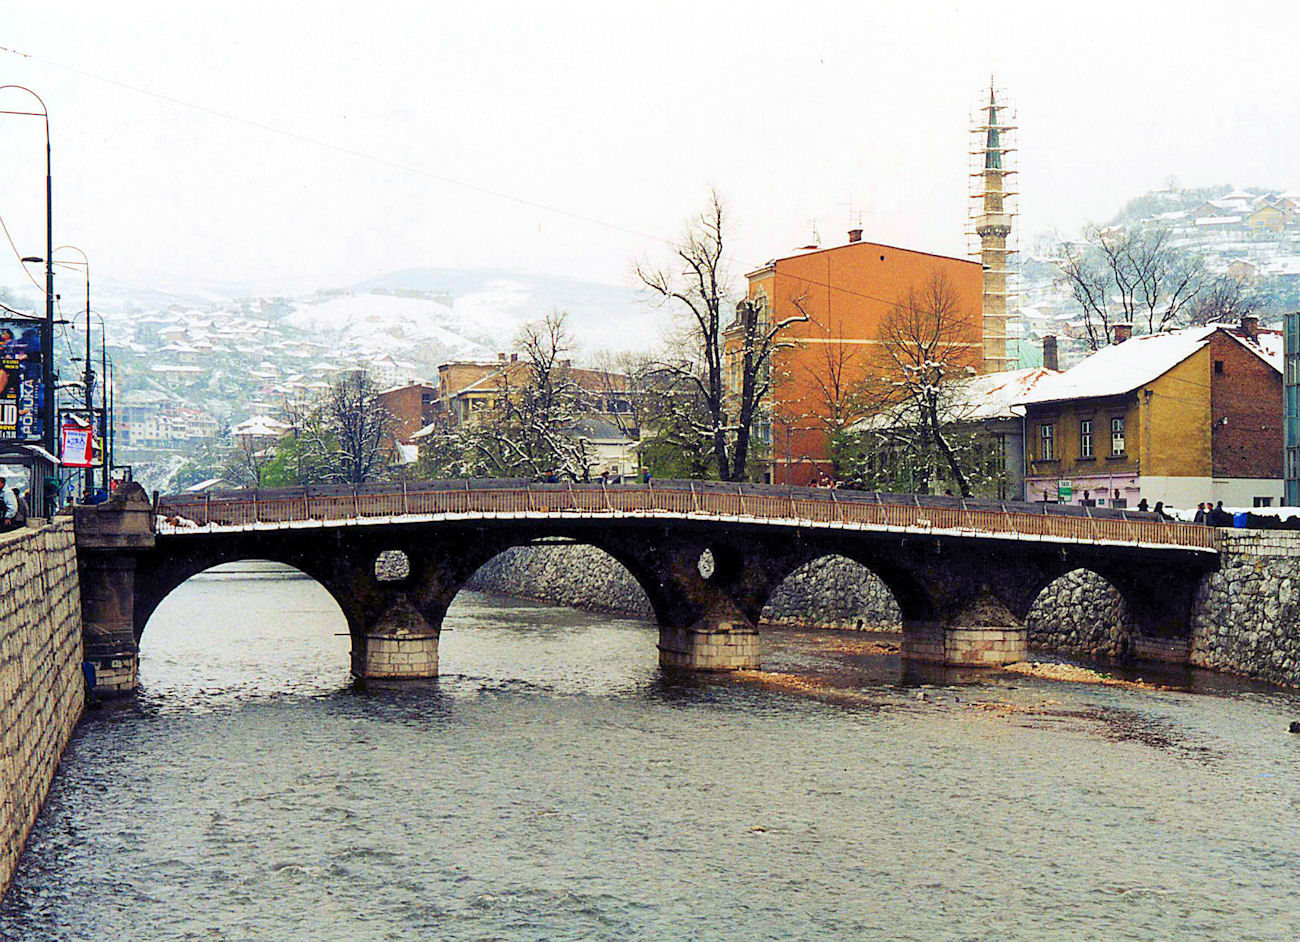 Sarajevo in 2003: there and back by train.